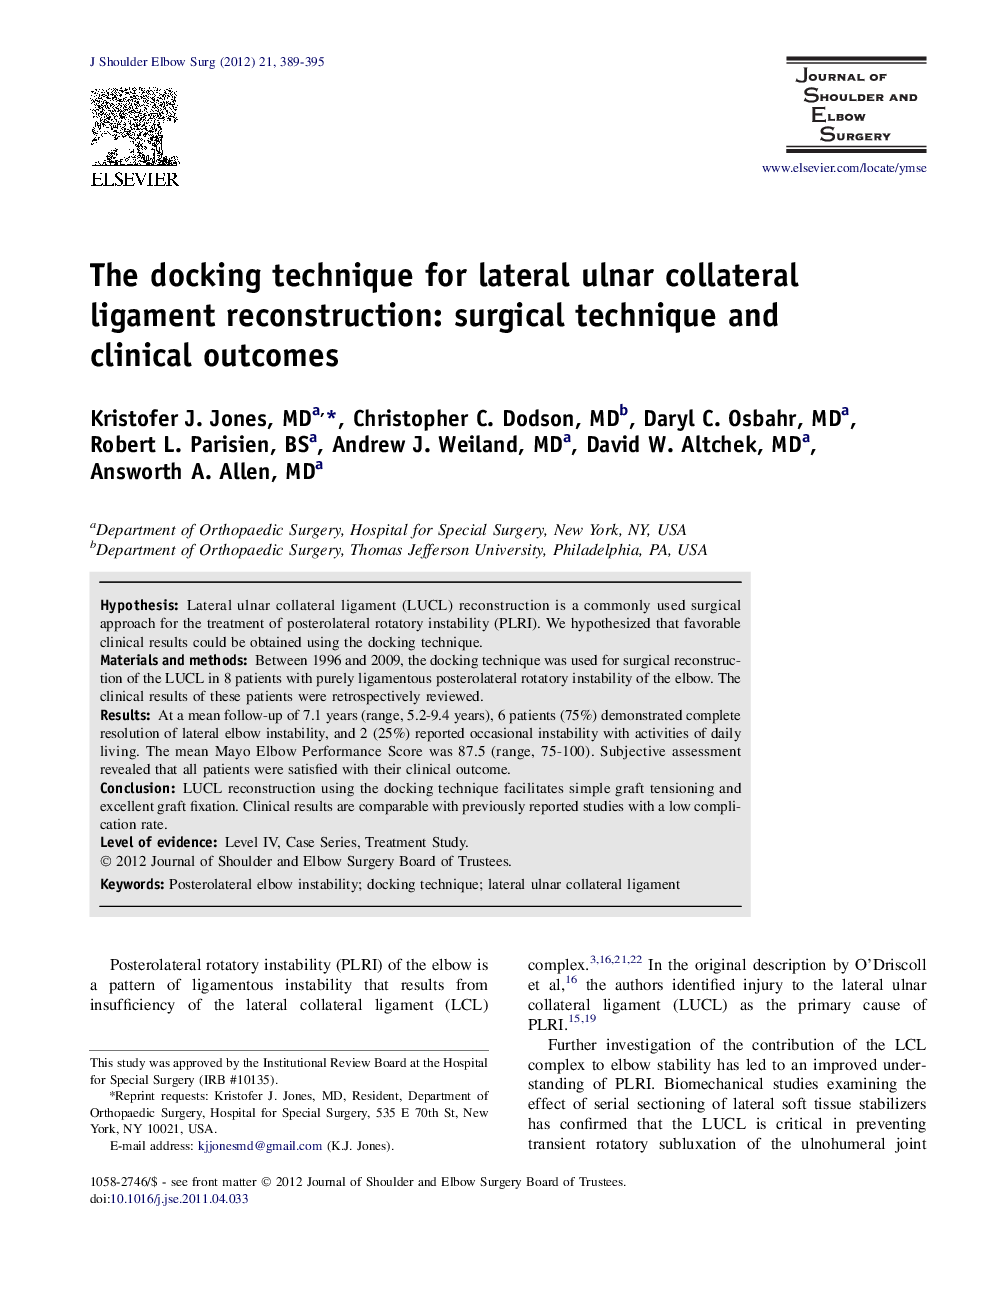 The docking technique for lateral ulnar collateral ligament reconstruction: surgical technique and clinical outcomes 